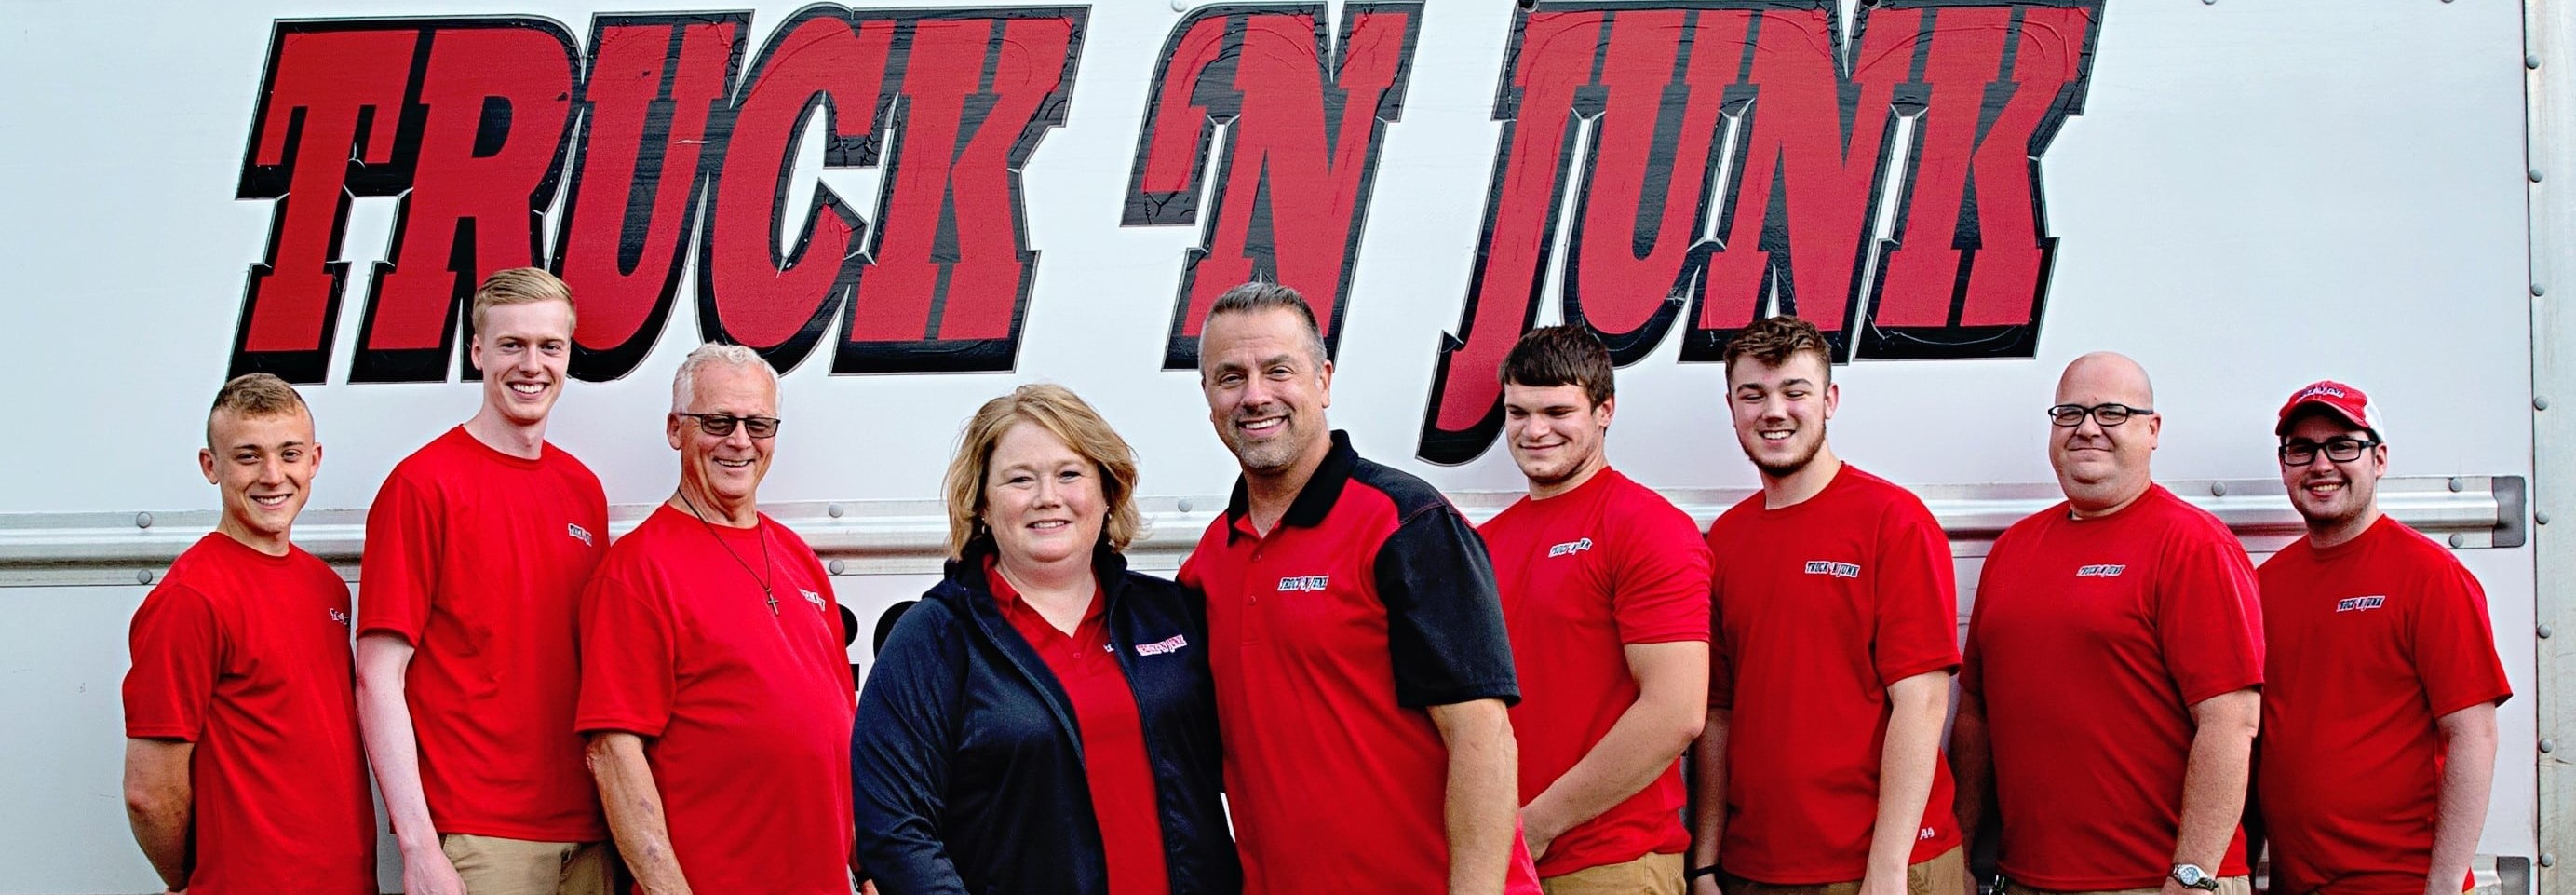 Truck`N Junk Removal Team in Front of Truck